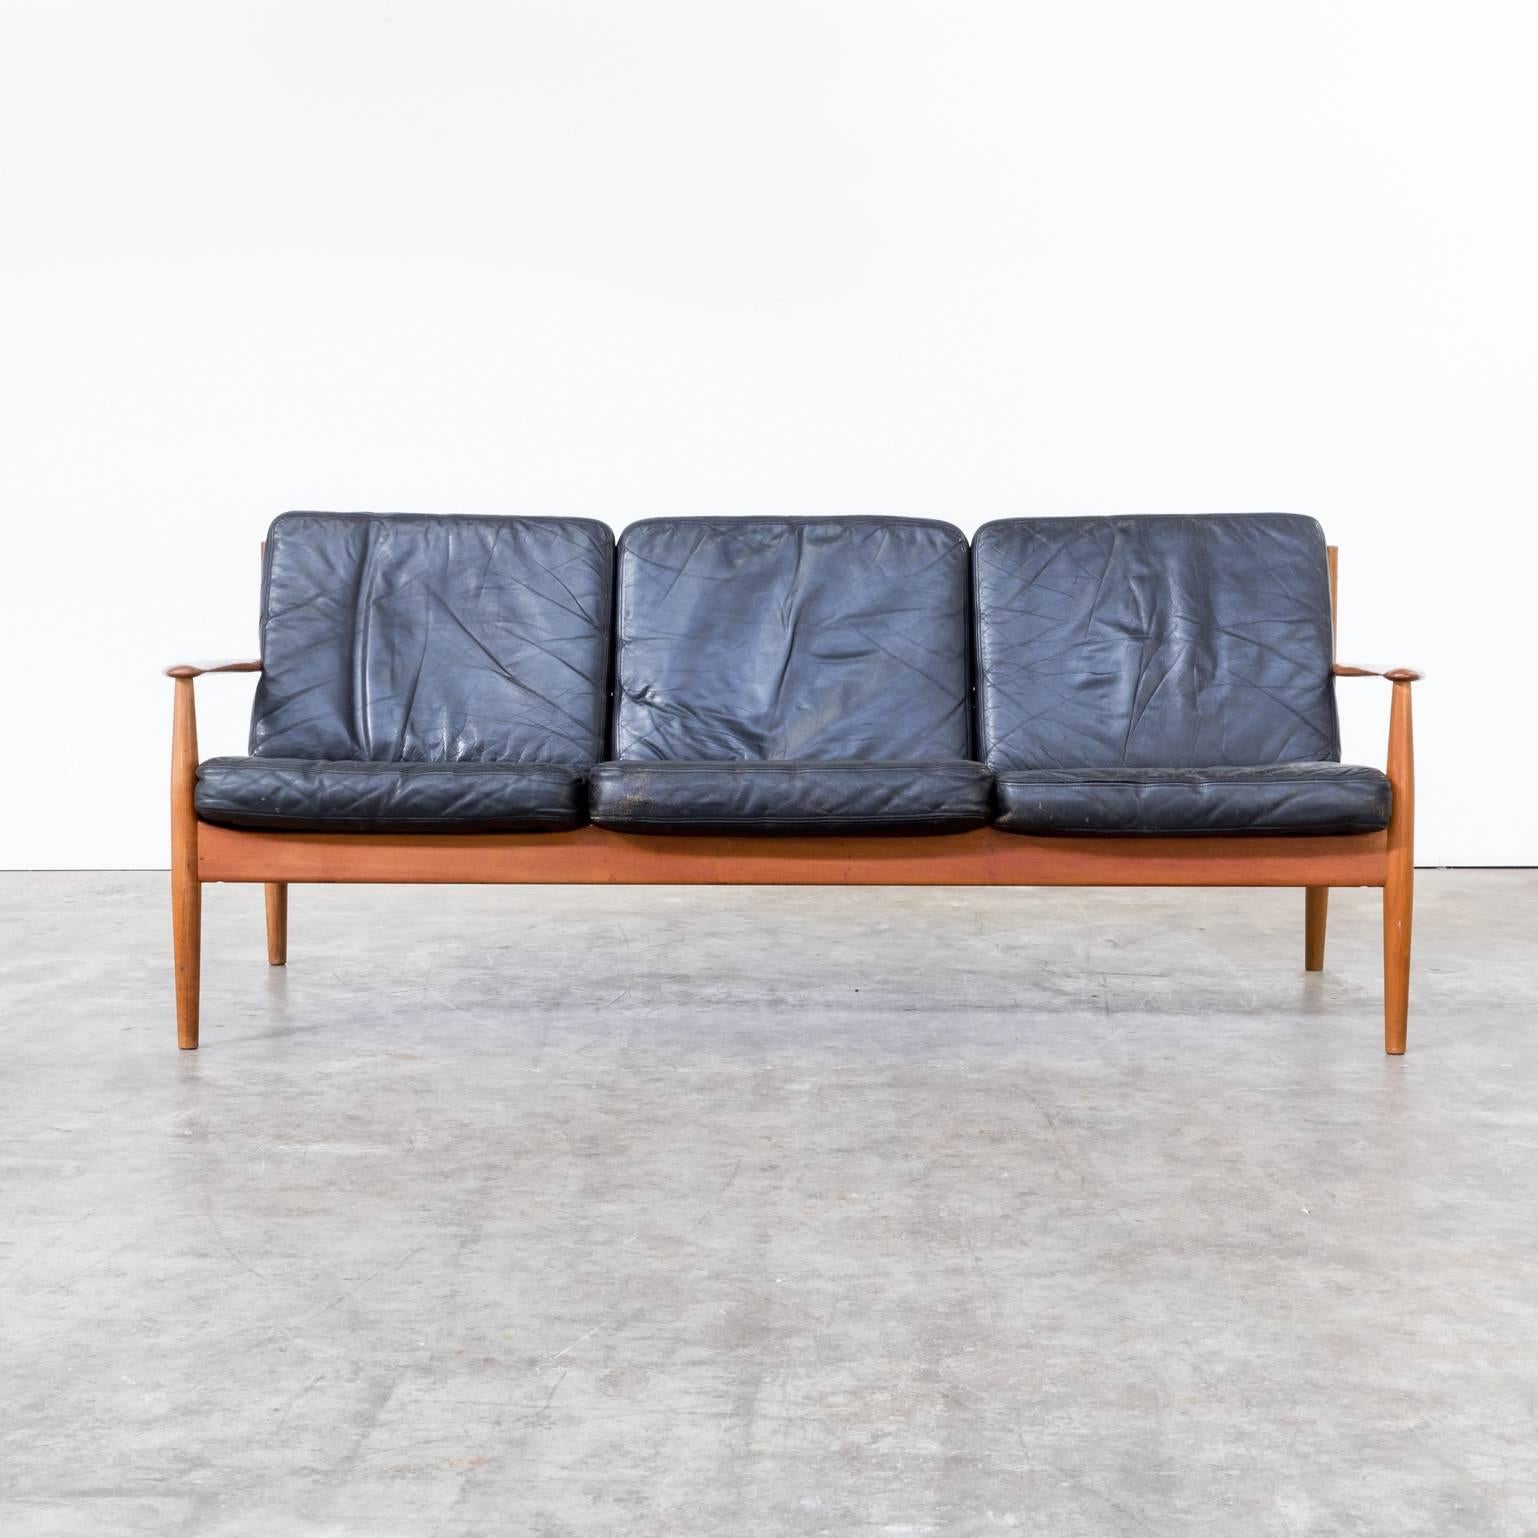 Grete Jalk three-seat sofa for France & Son, Iconic designed sofa by Grete Jalk, very good condition.